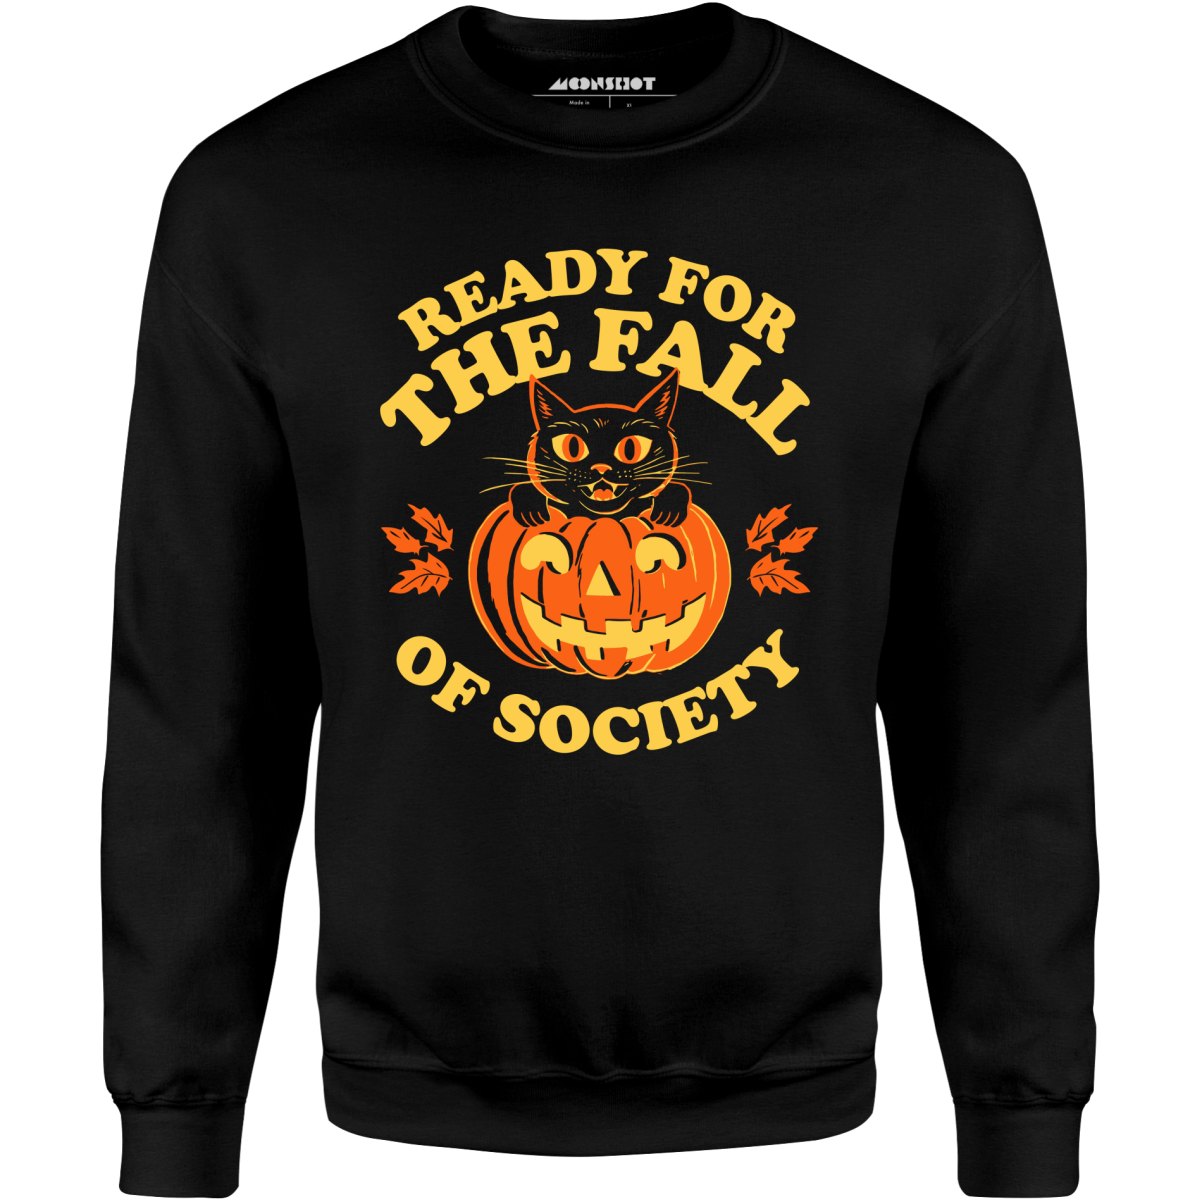 Ready For The Fall of Society - Unisex Sweatshirt